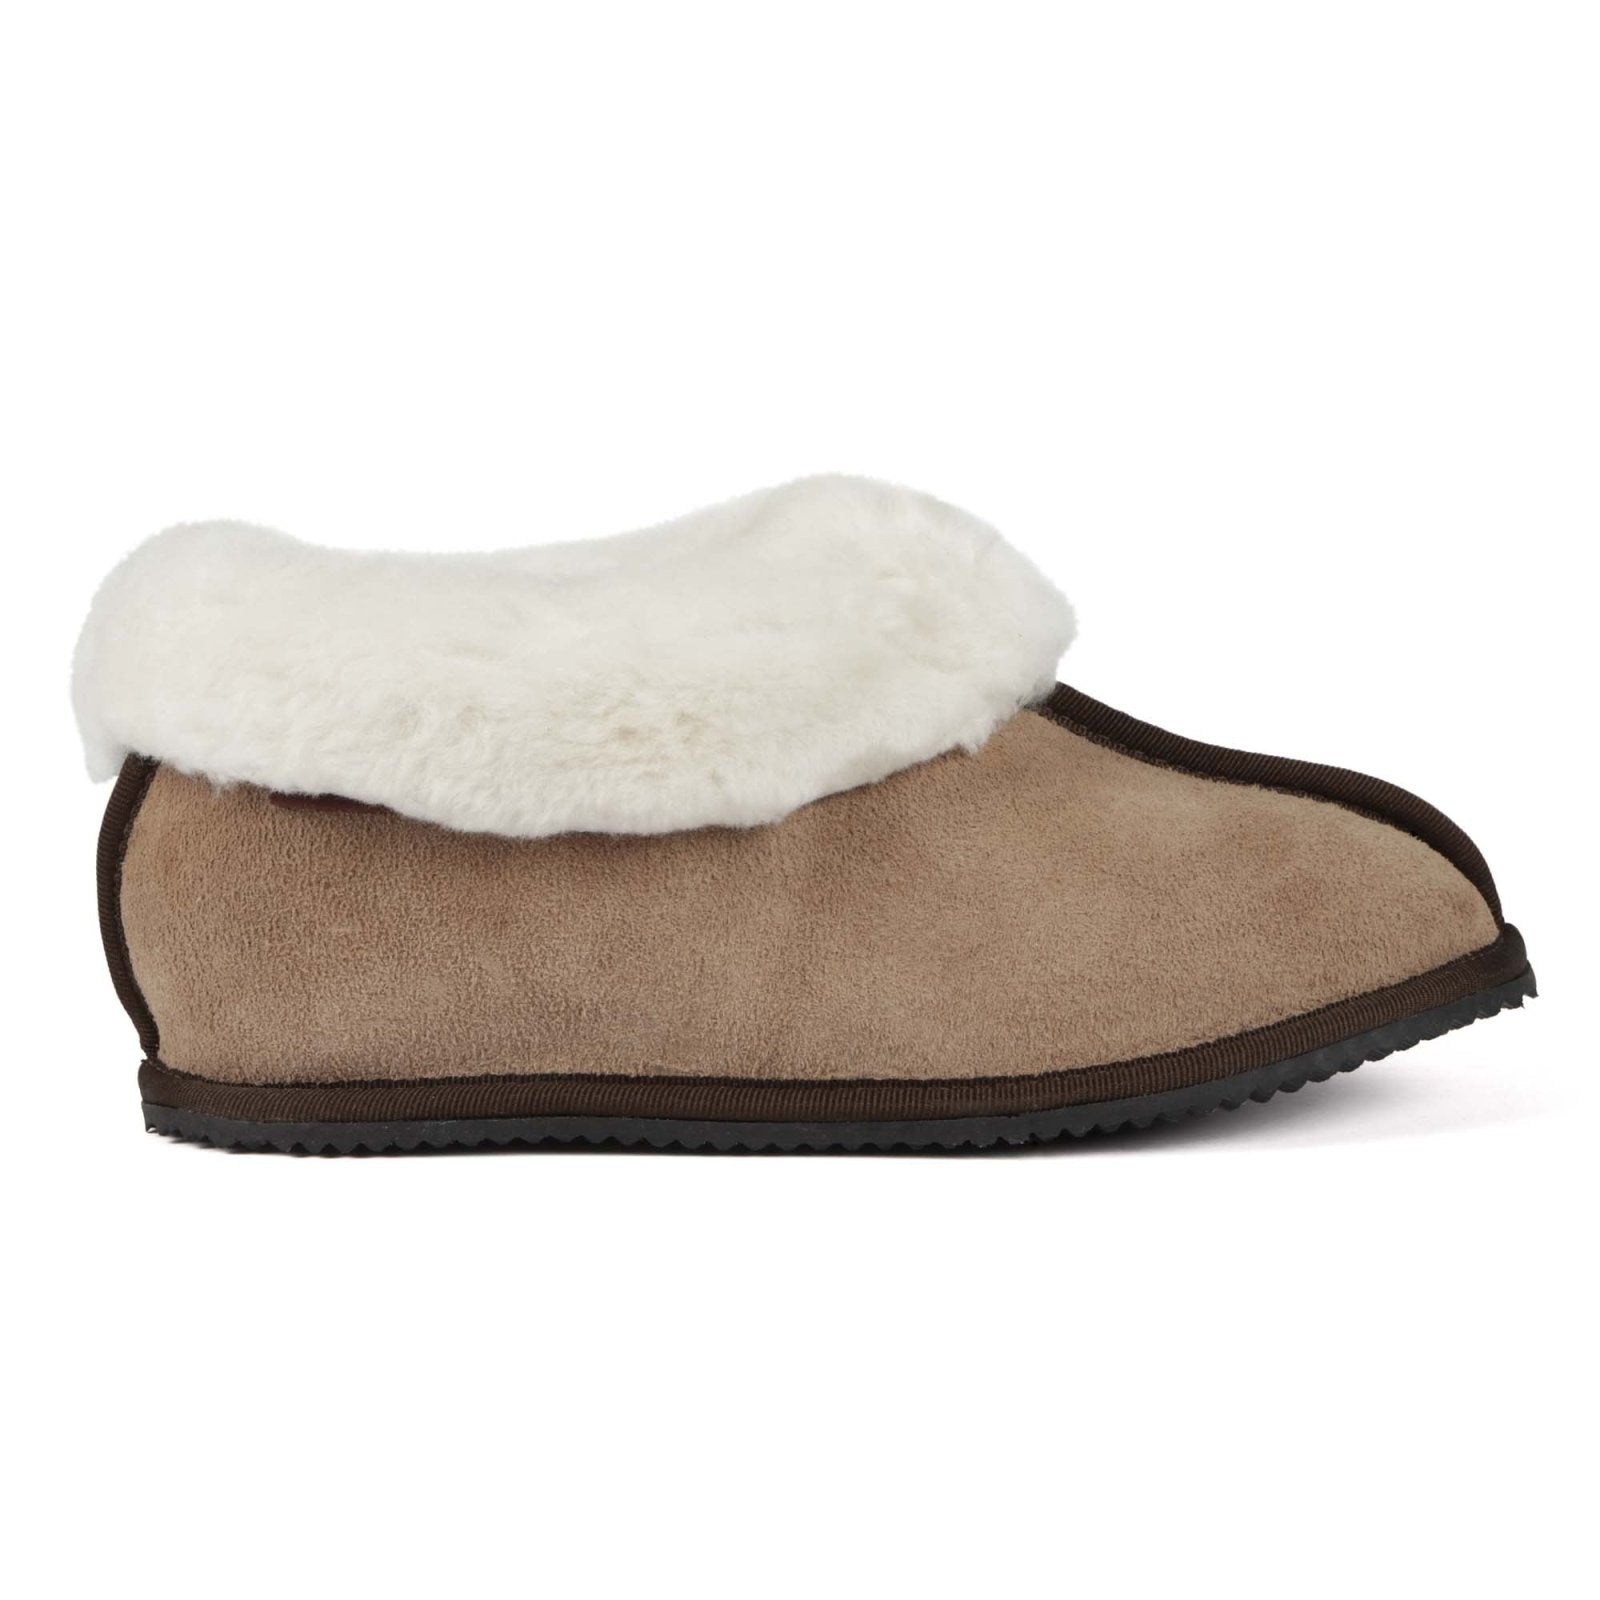 Sneeubok Ladies Premium Suede Woolen Slippers - Khaki - Freestyle SA Proudly local leather boots veldskoens vellies leather shoes suede veldskoens